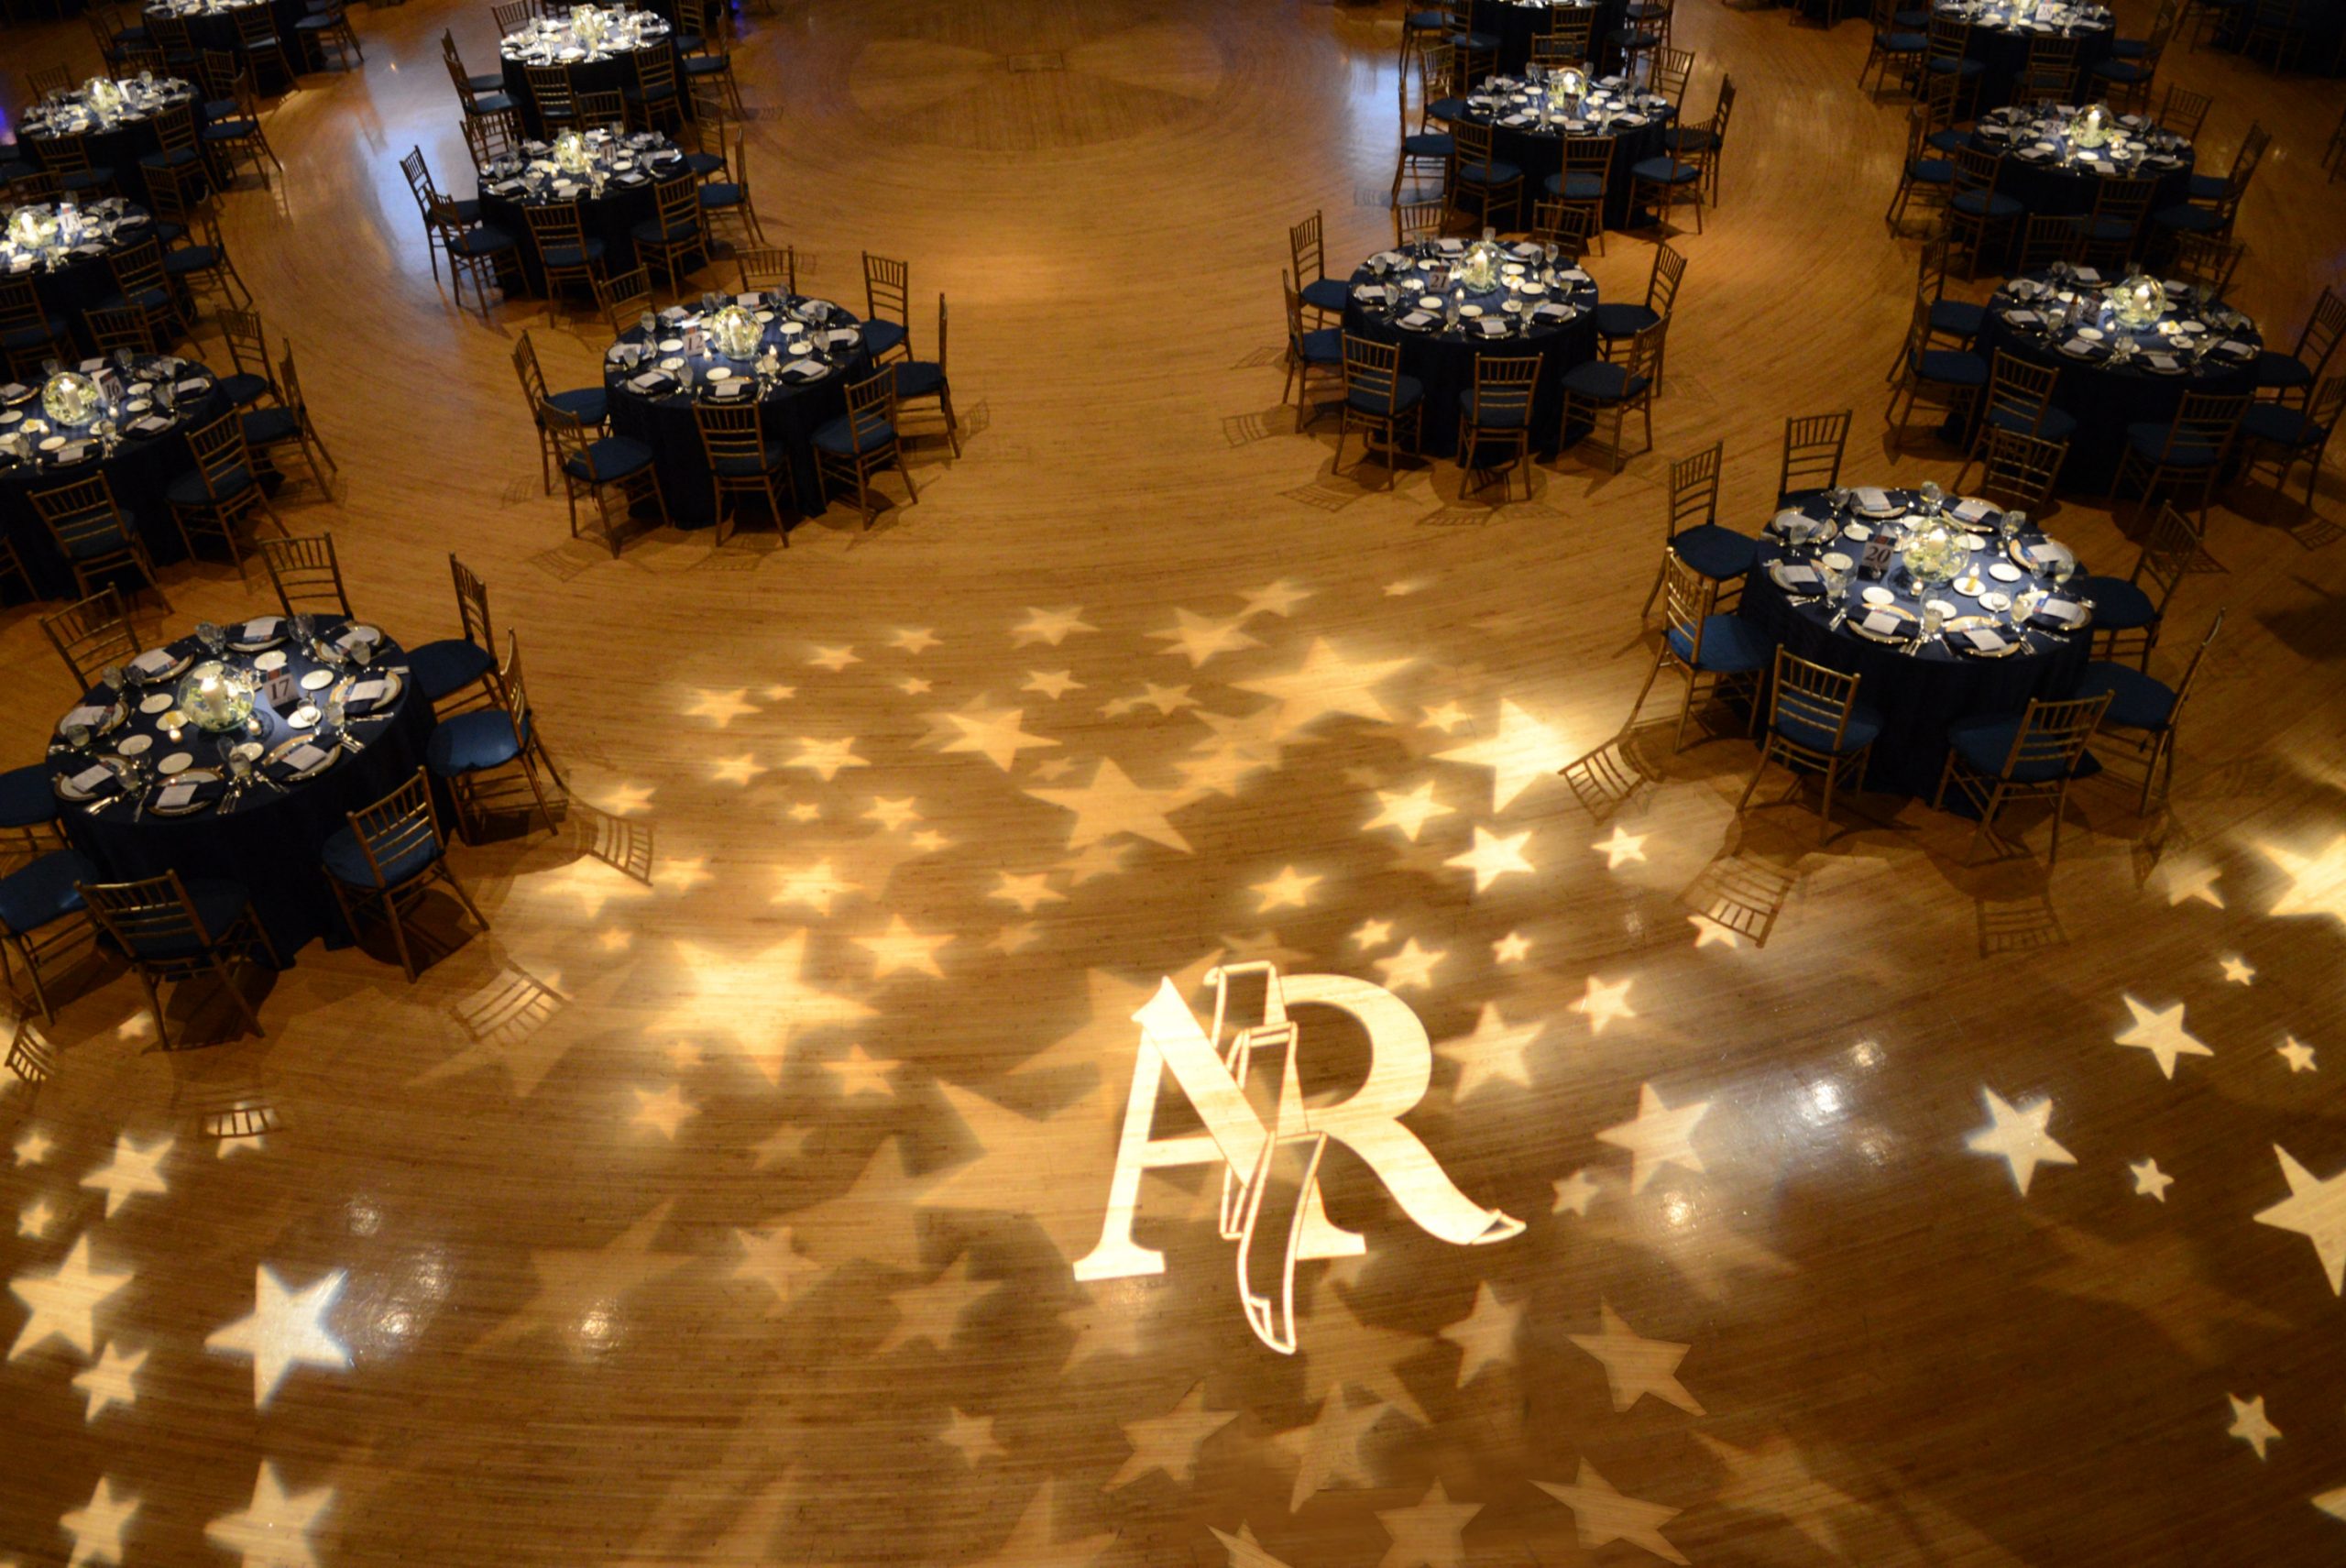 image of an empty room decorated for a 50th anniversary